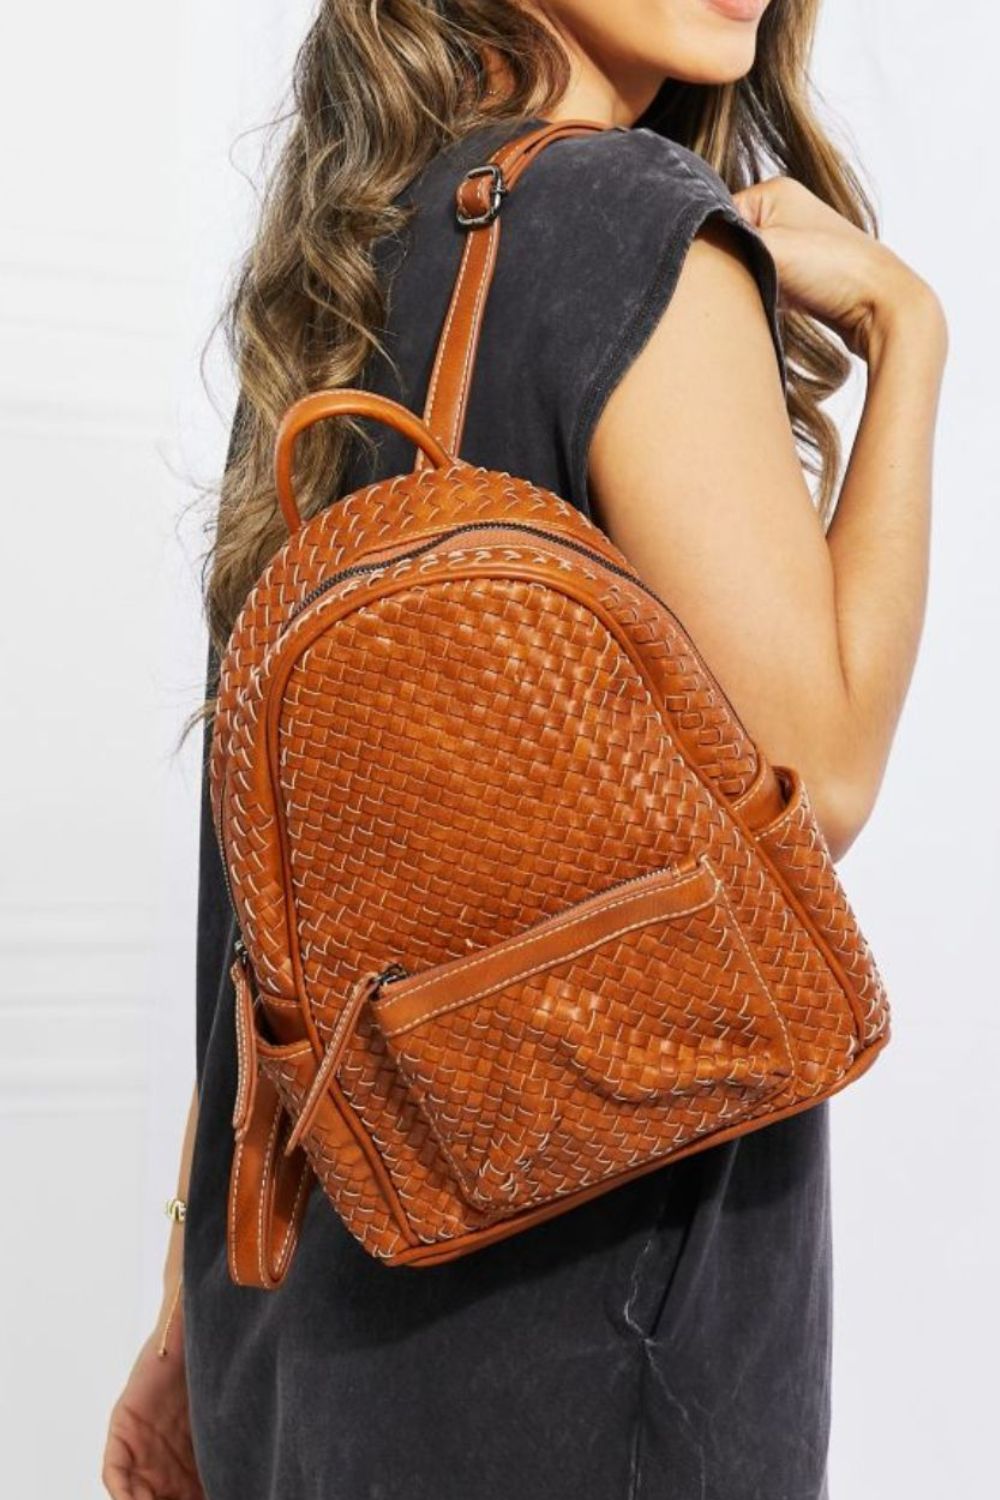 SHOMICO Certainly Chic Faux Leather Woven Backpack Print on any thing USA/STOD clothes